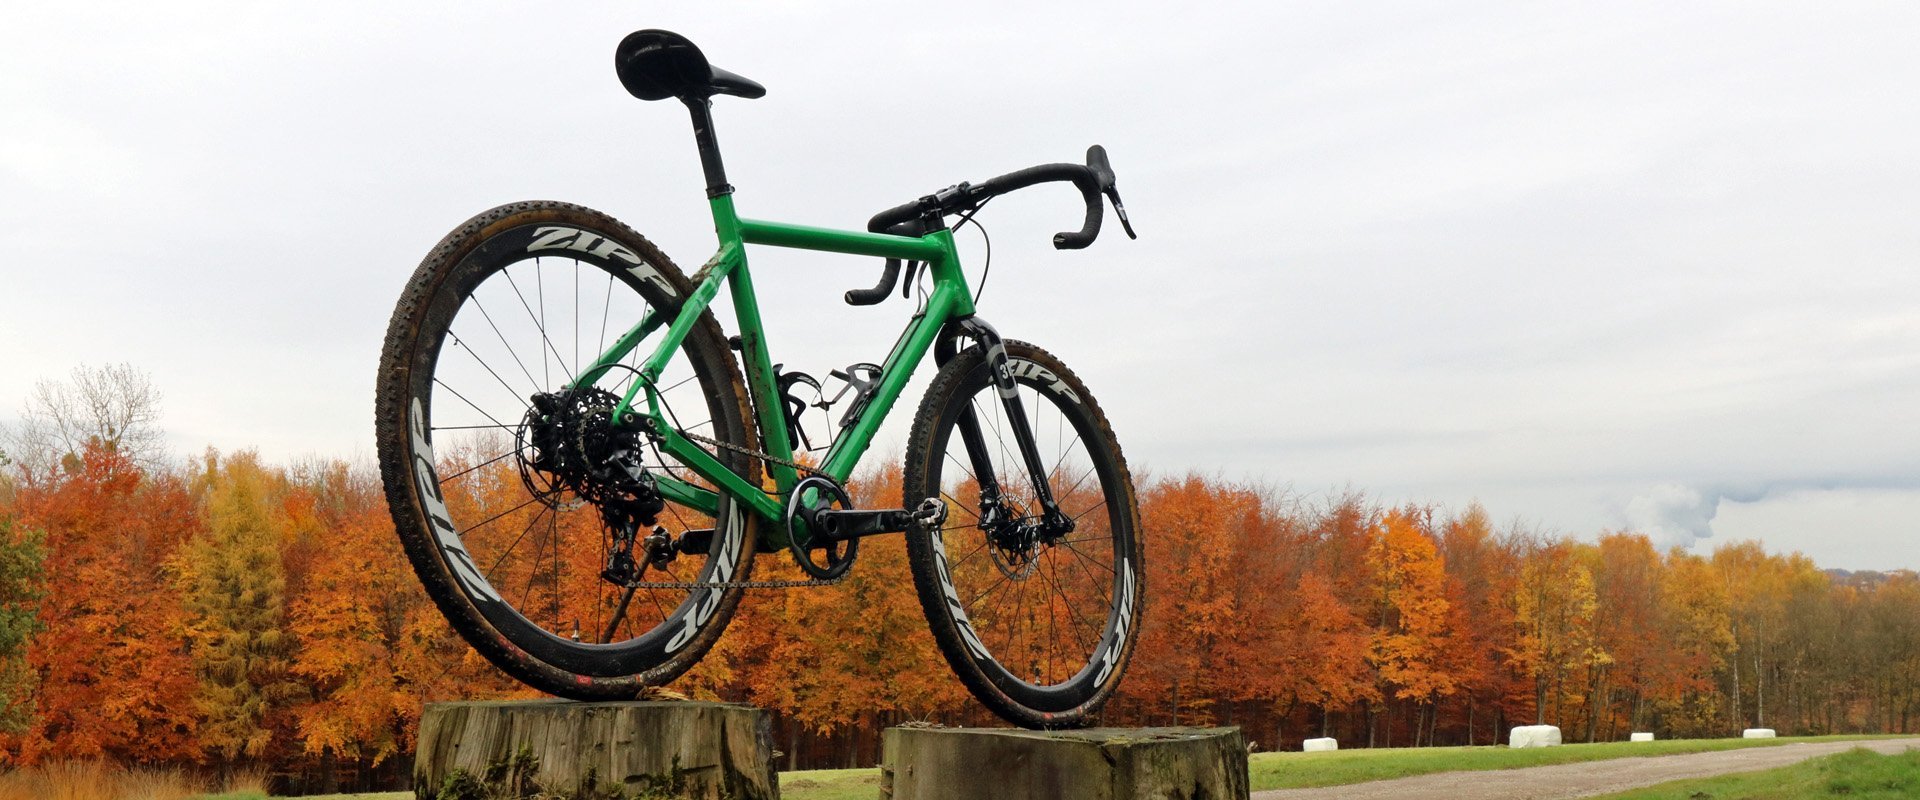 Gravel bikes are great fun on- and off-road and make for a more comfortable ride than an aggressive cross racer. 